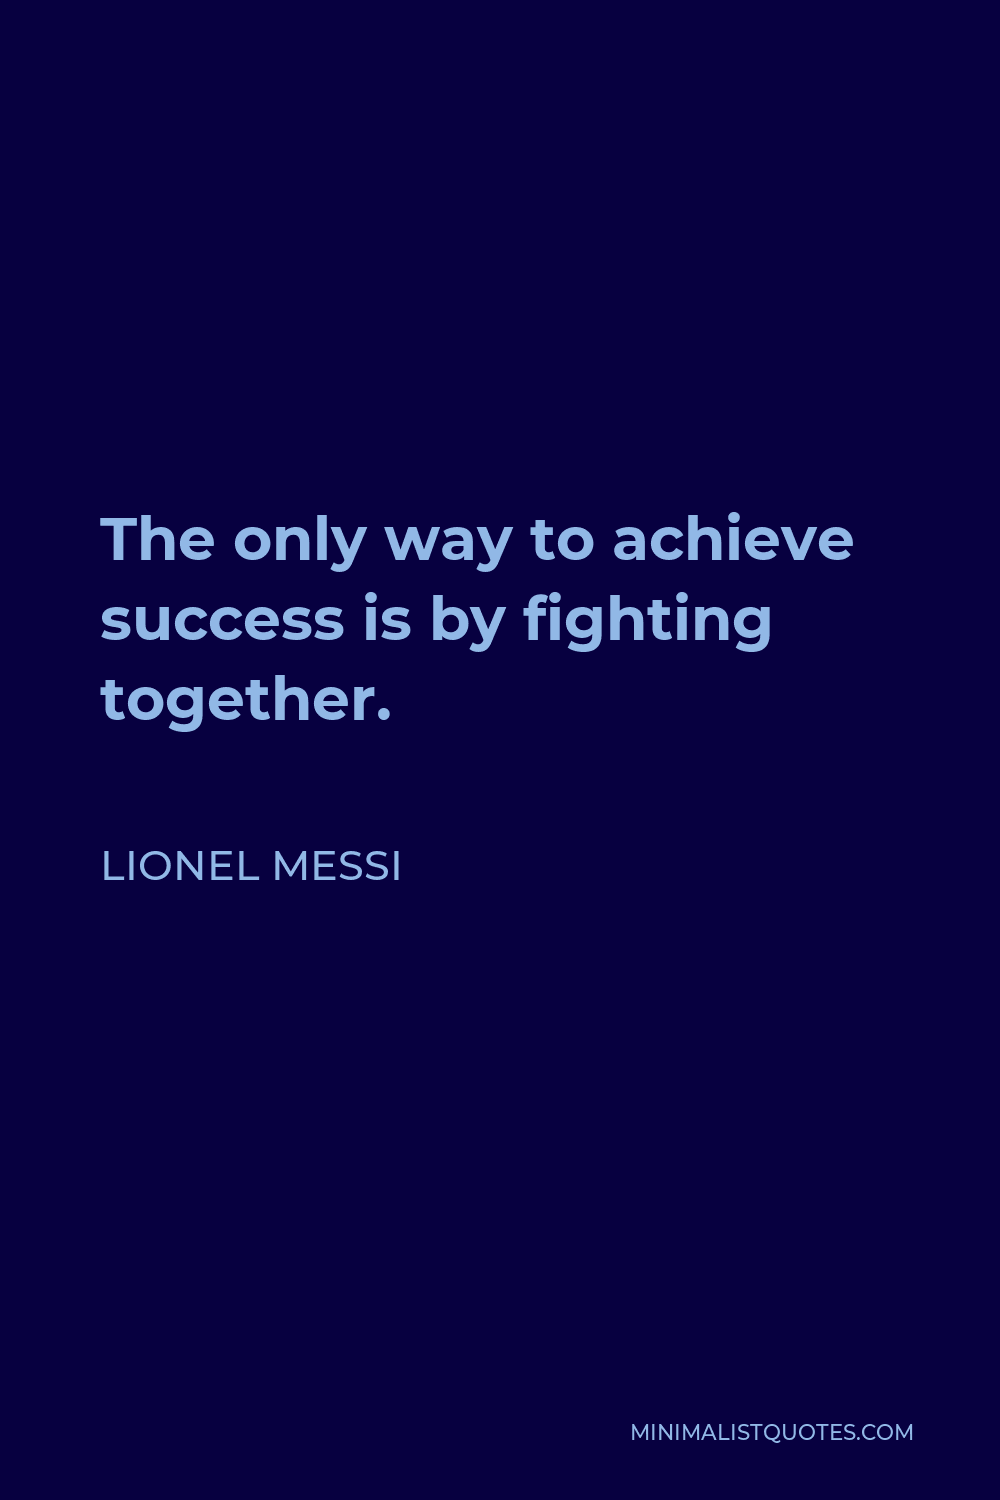 Lionel Messi Quote - The only way to achieve success is by fighting together.